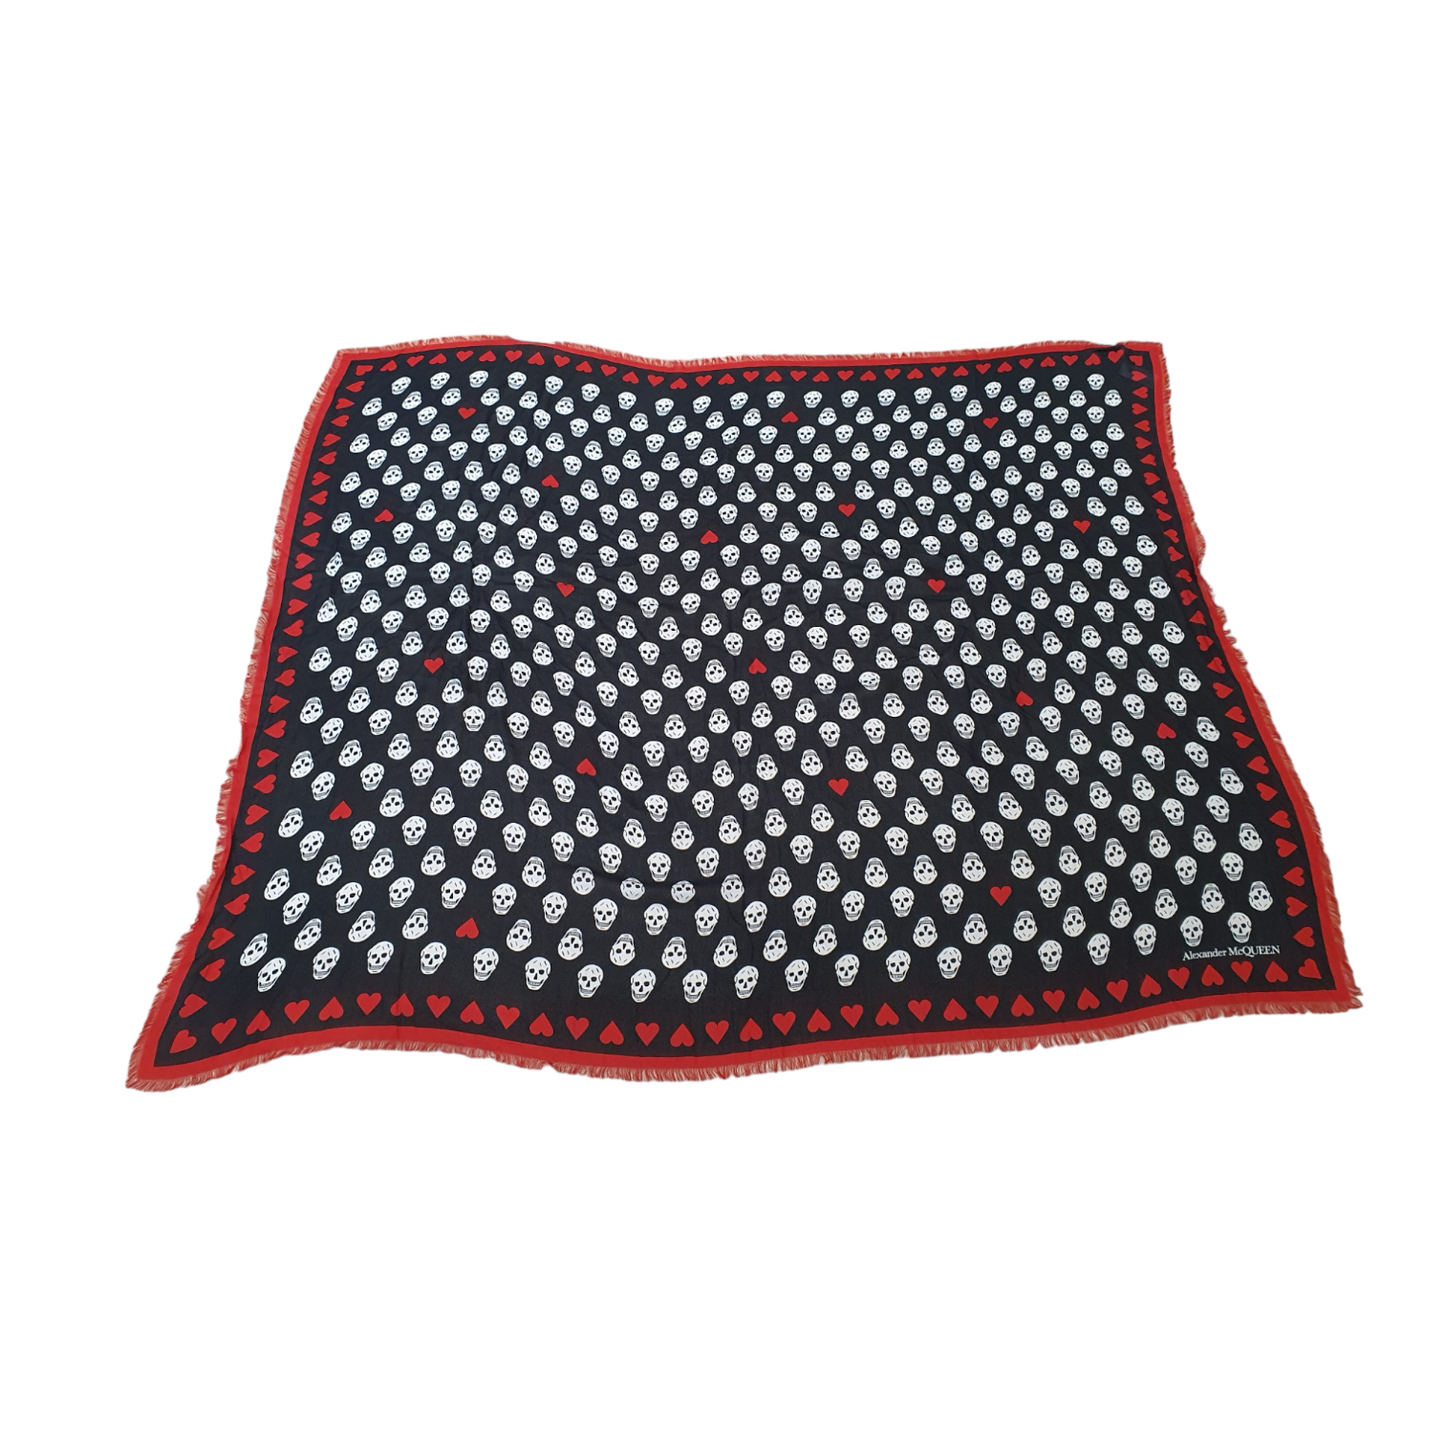 Alexander McQueen Love Heart Skull Scarf, black and red